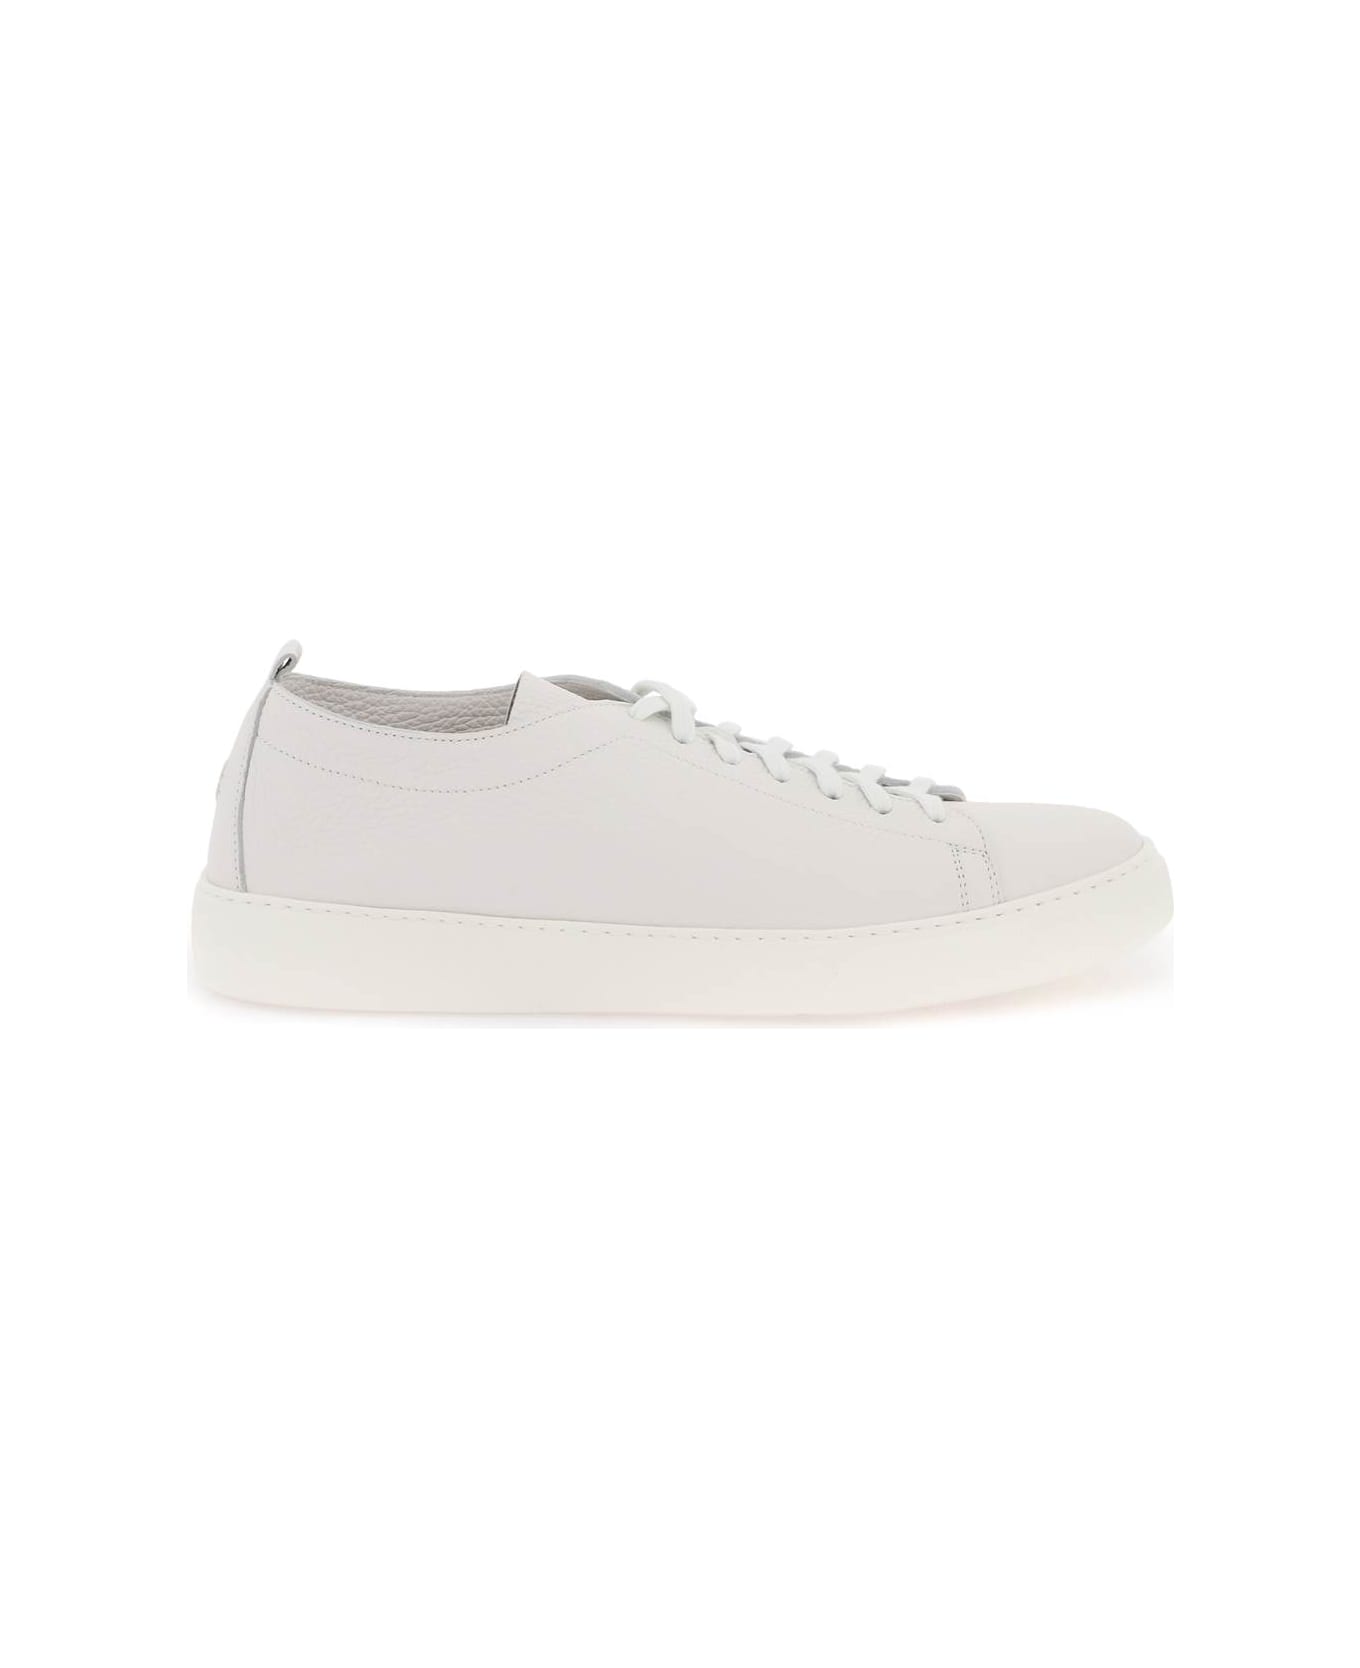 Henderson Baracco Leather Sneakers - ICE RIVIERA (Grey)